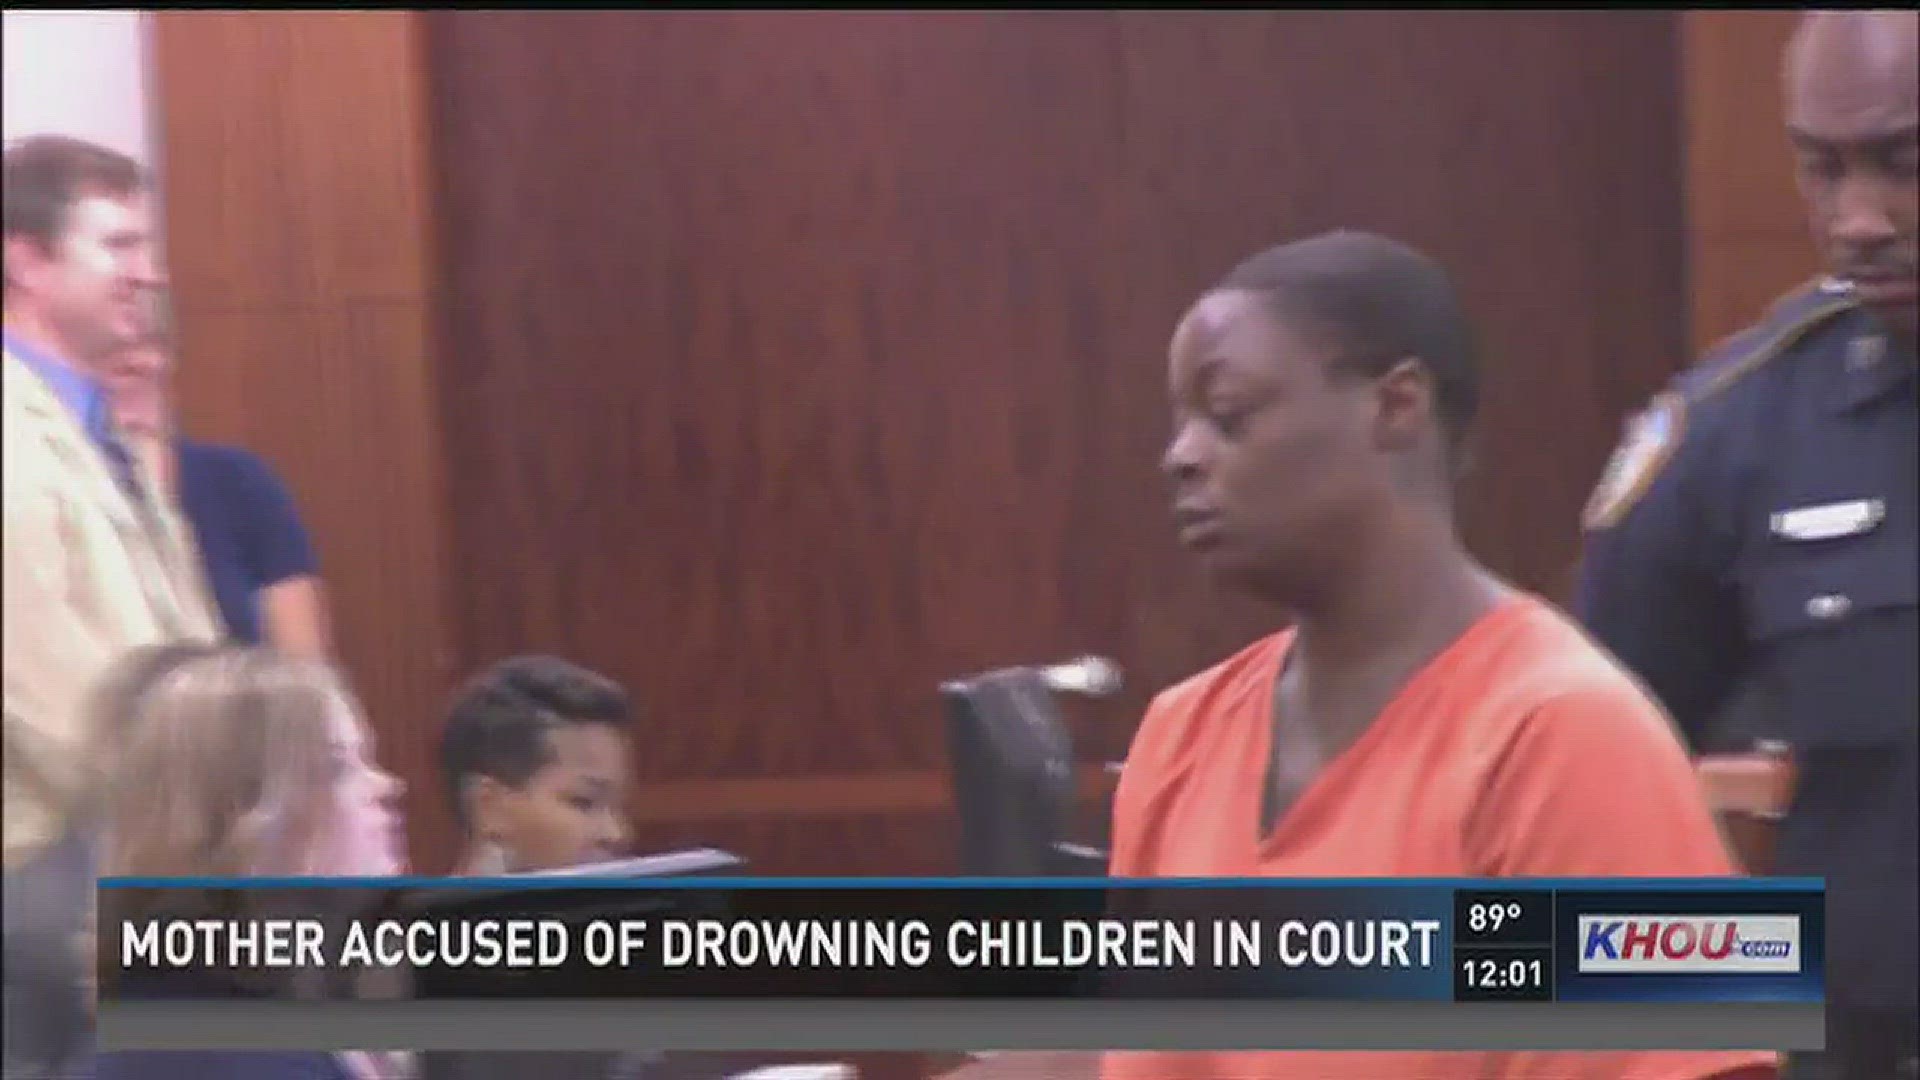 Sheborah Thomas remained quiet and stoic during her first court appearance.